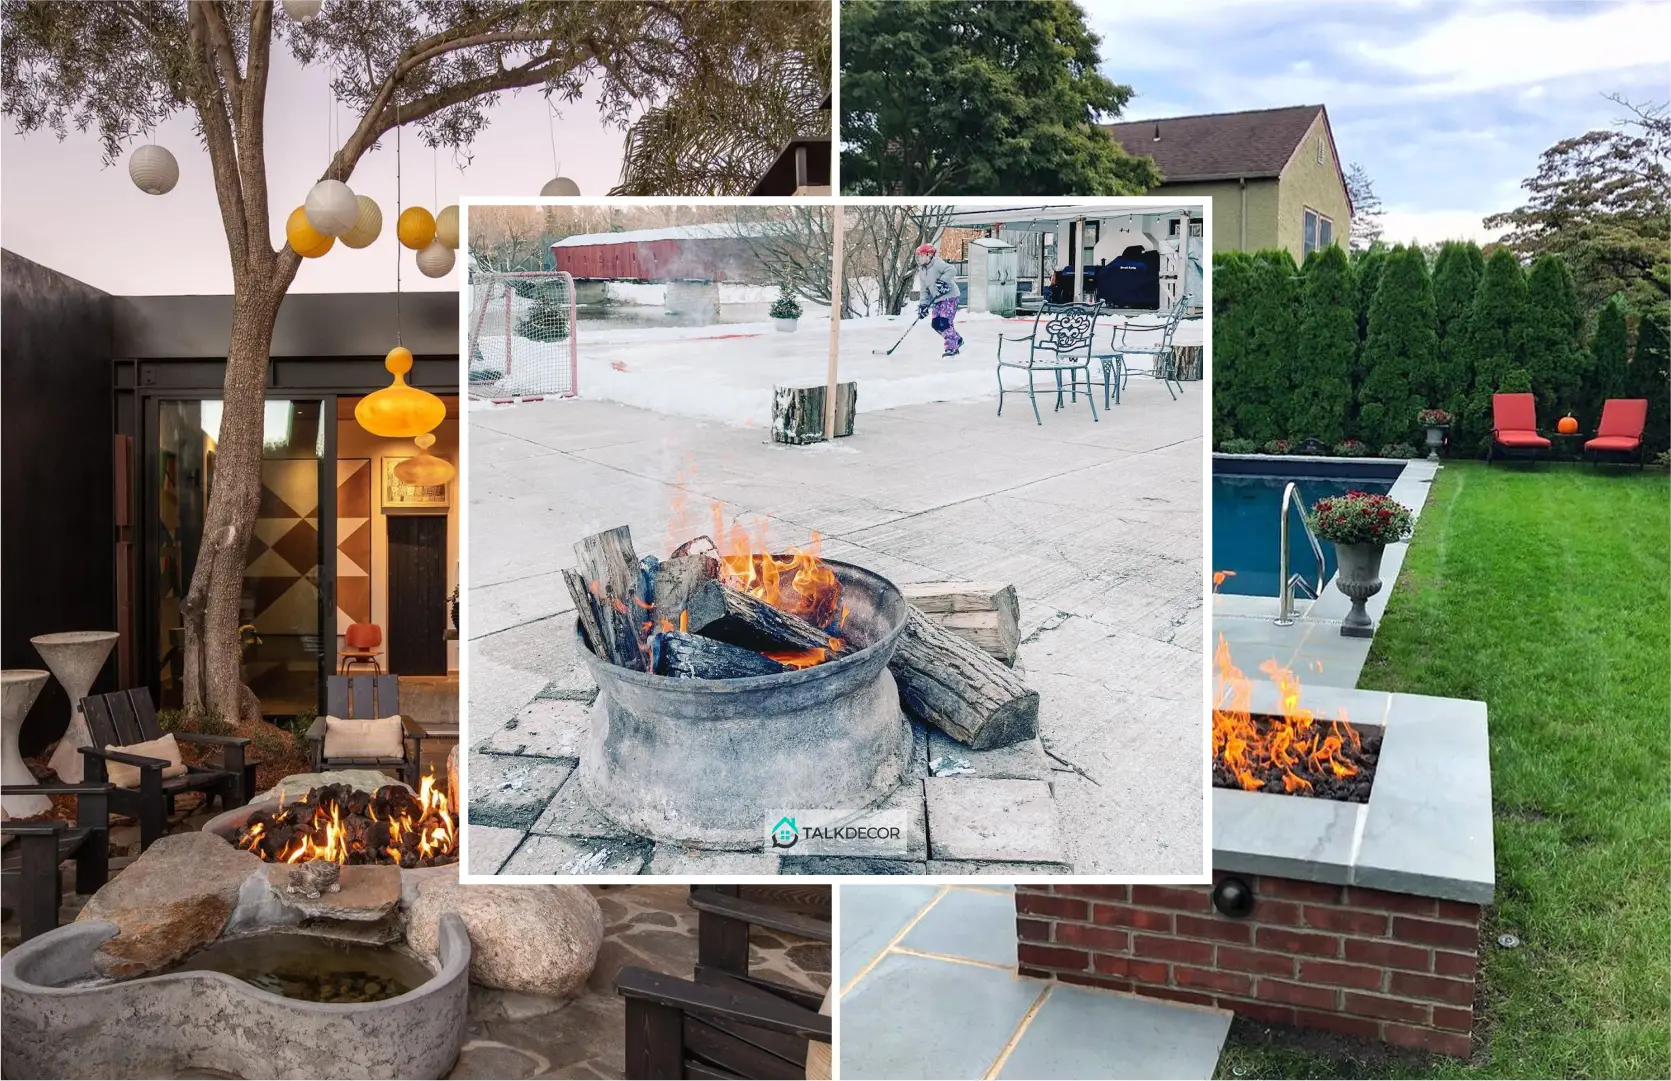 33 Proper Winter Fire Pit Designs for Your Backyard